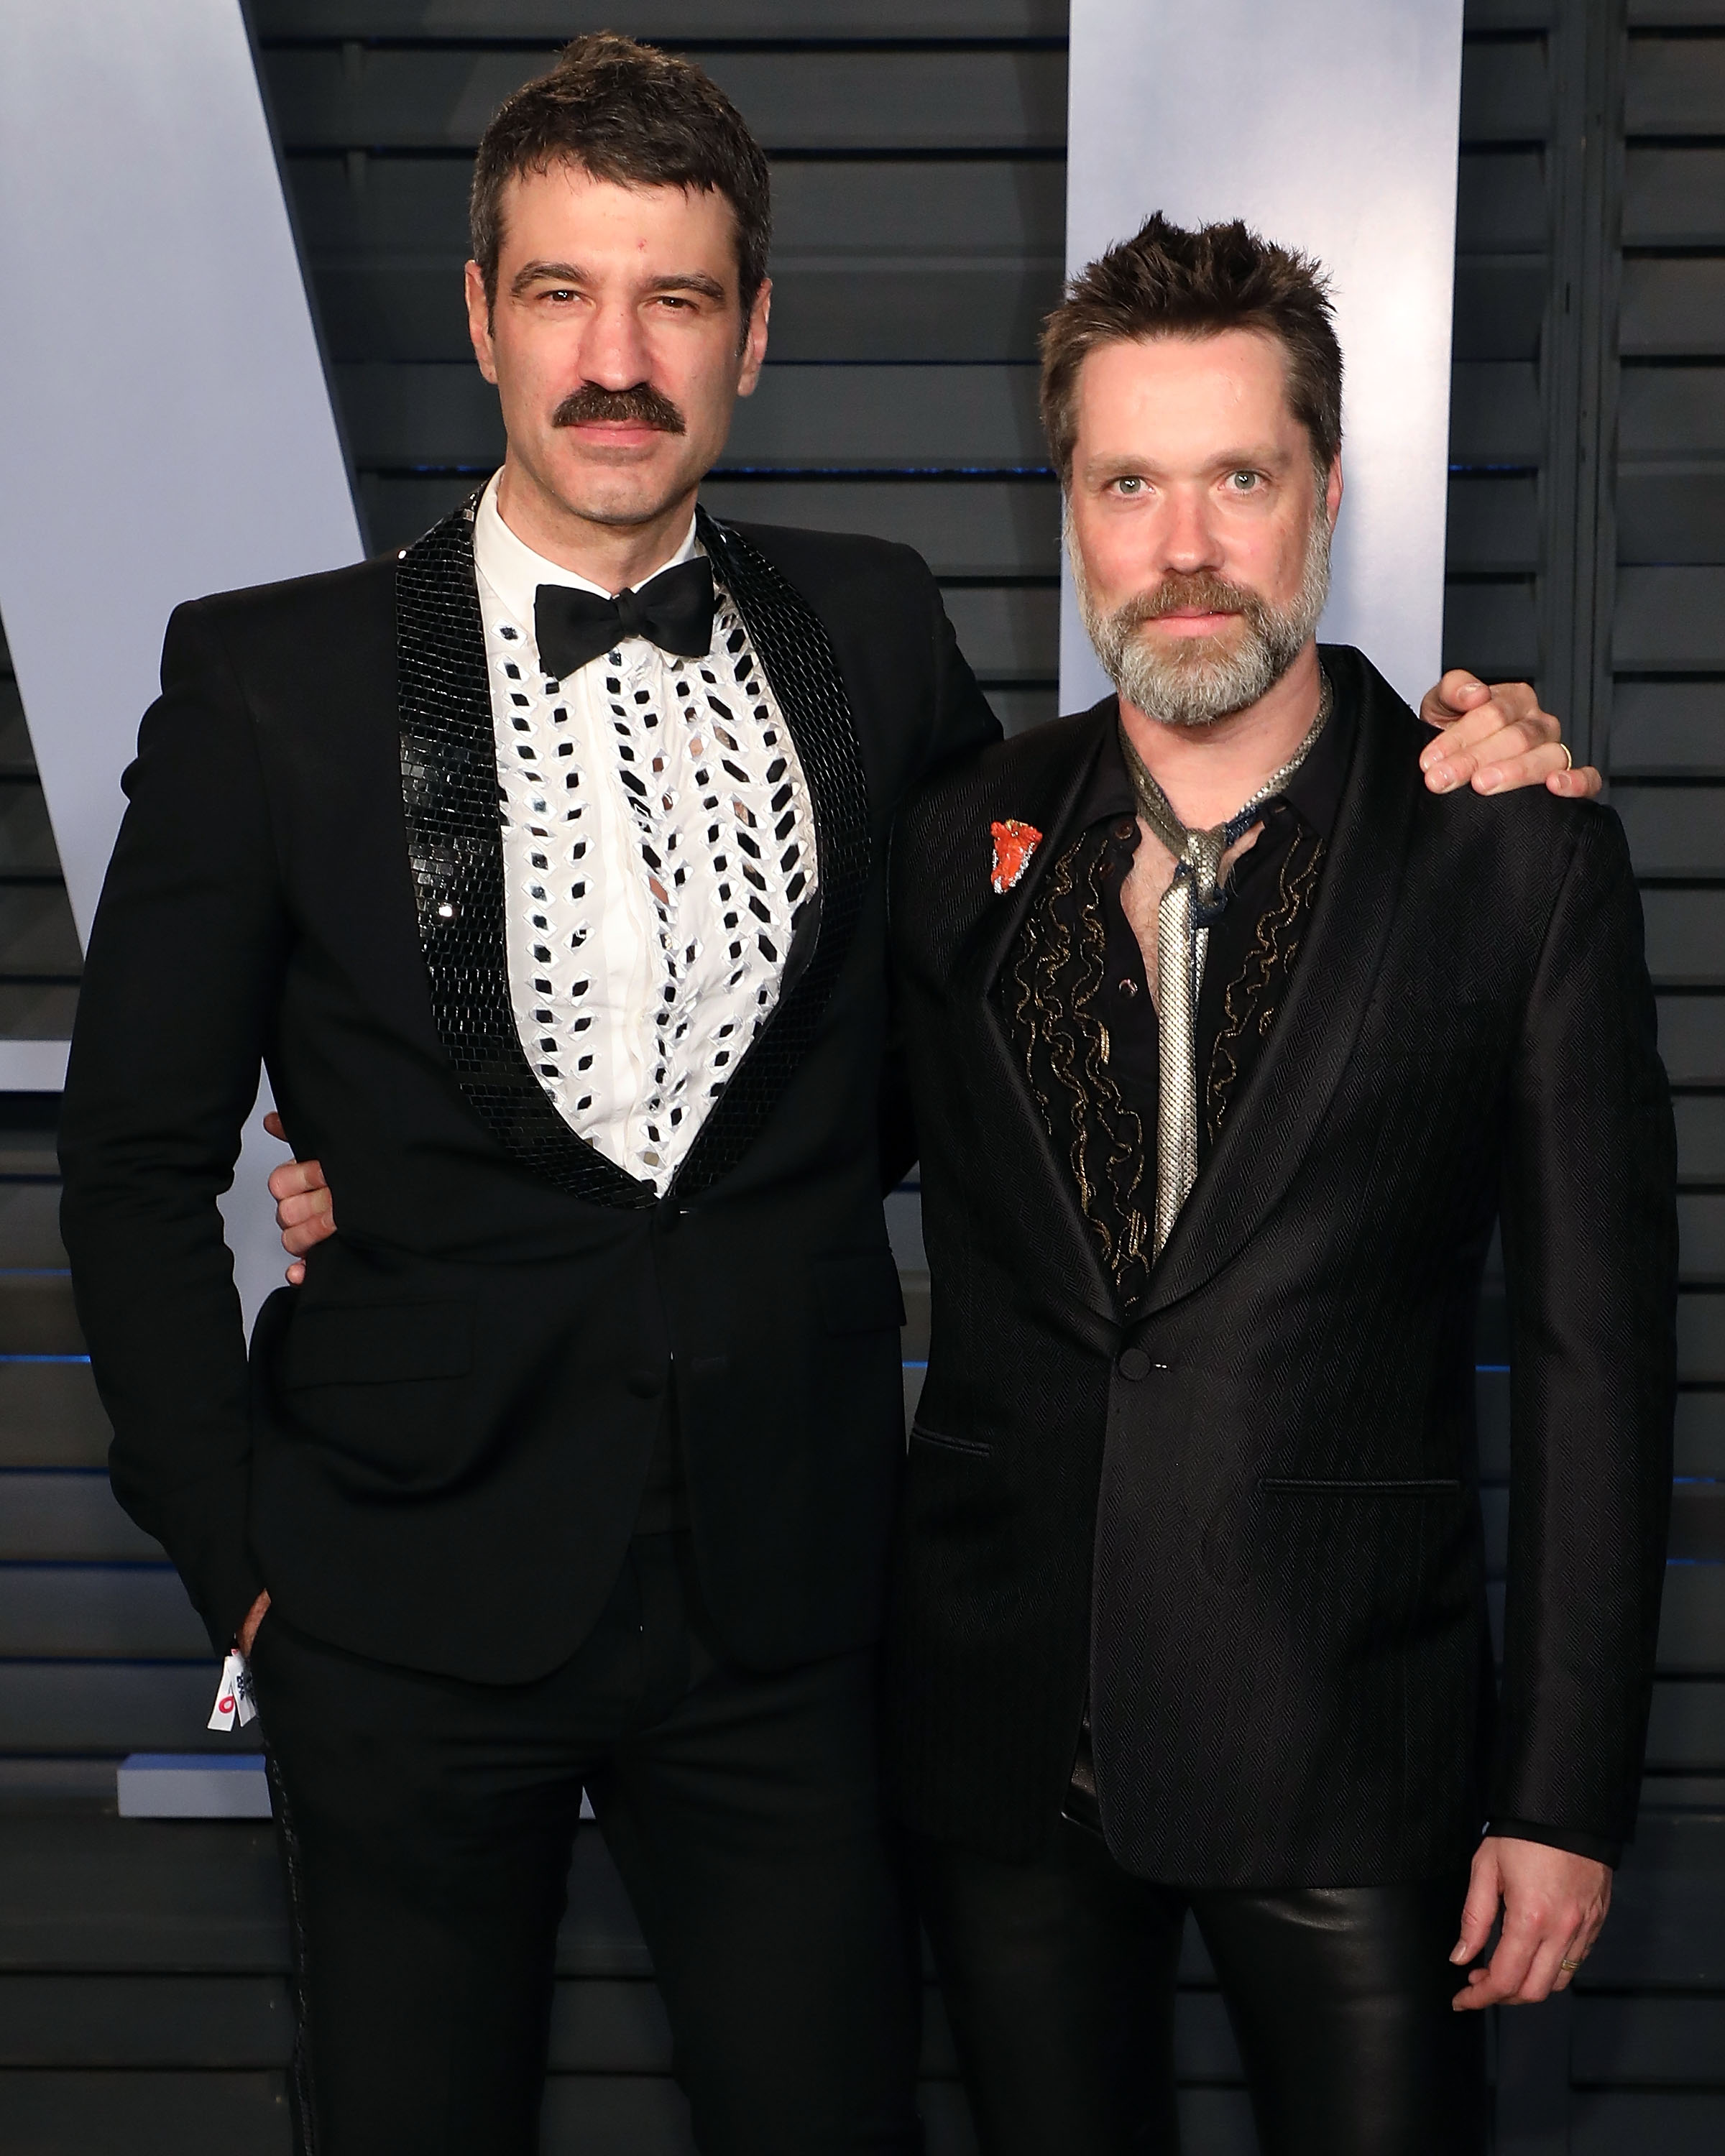 Jorn Weisbrodt and Rufus Wainwright at the 2018 Vanity Fair Oscar Party on March 4, 2018, in Beverly Hills, California. | Source: Getty Images